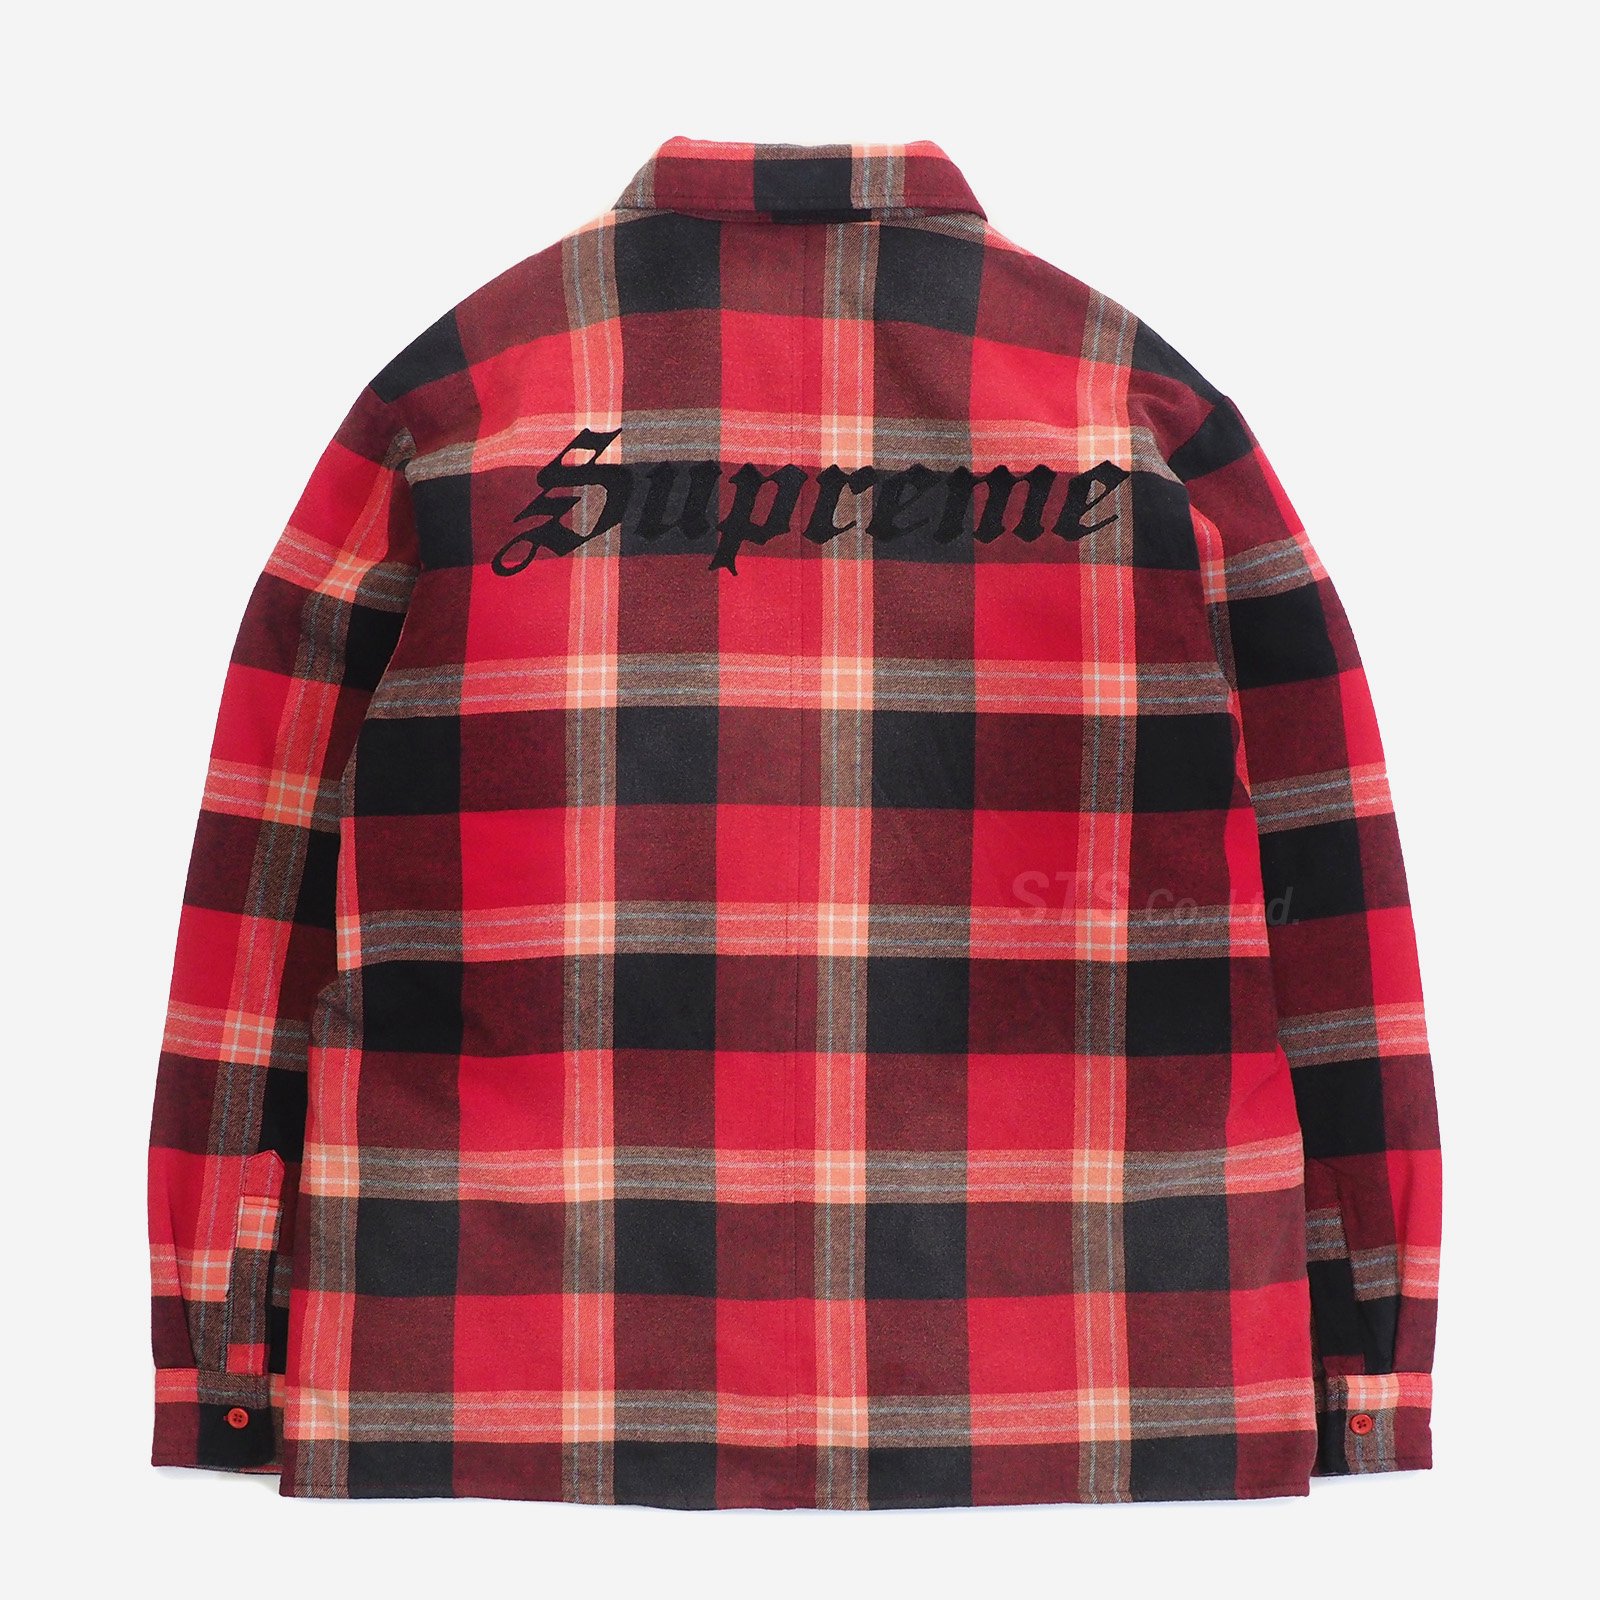 supreme Quilted Flannel Shirt Sサイズ 02